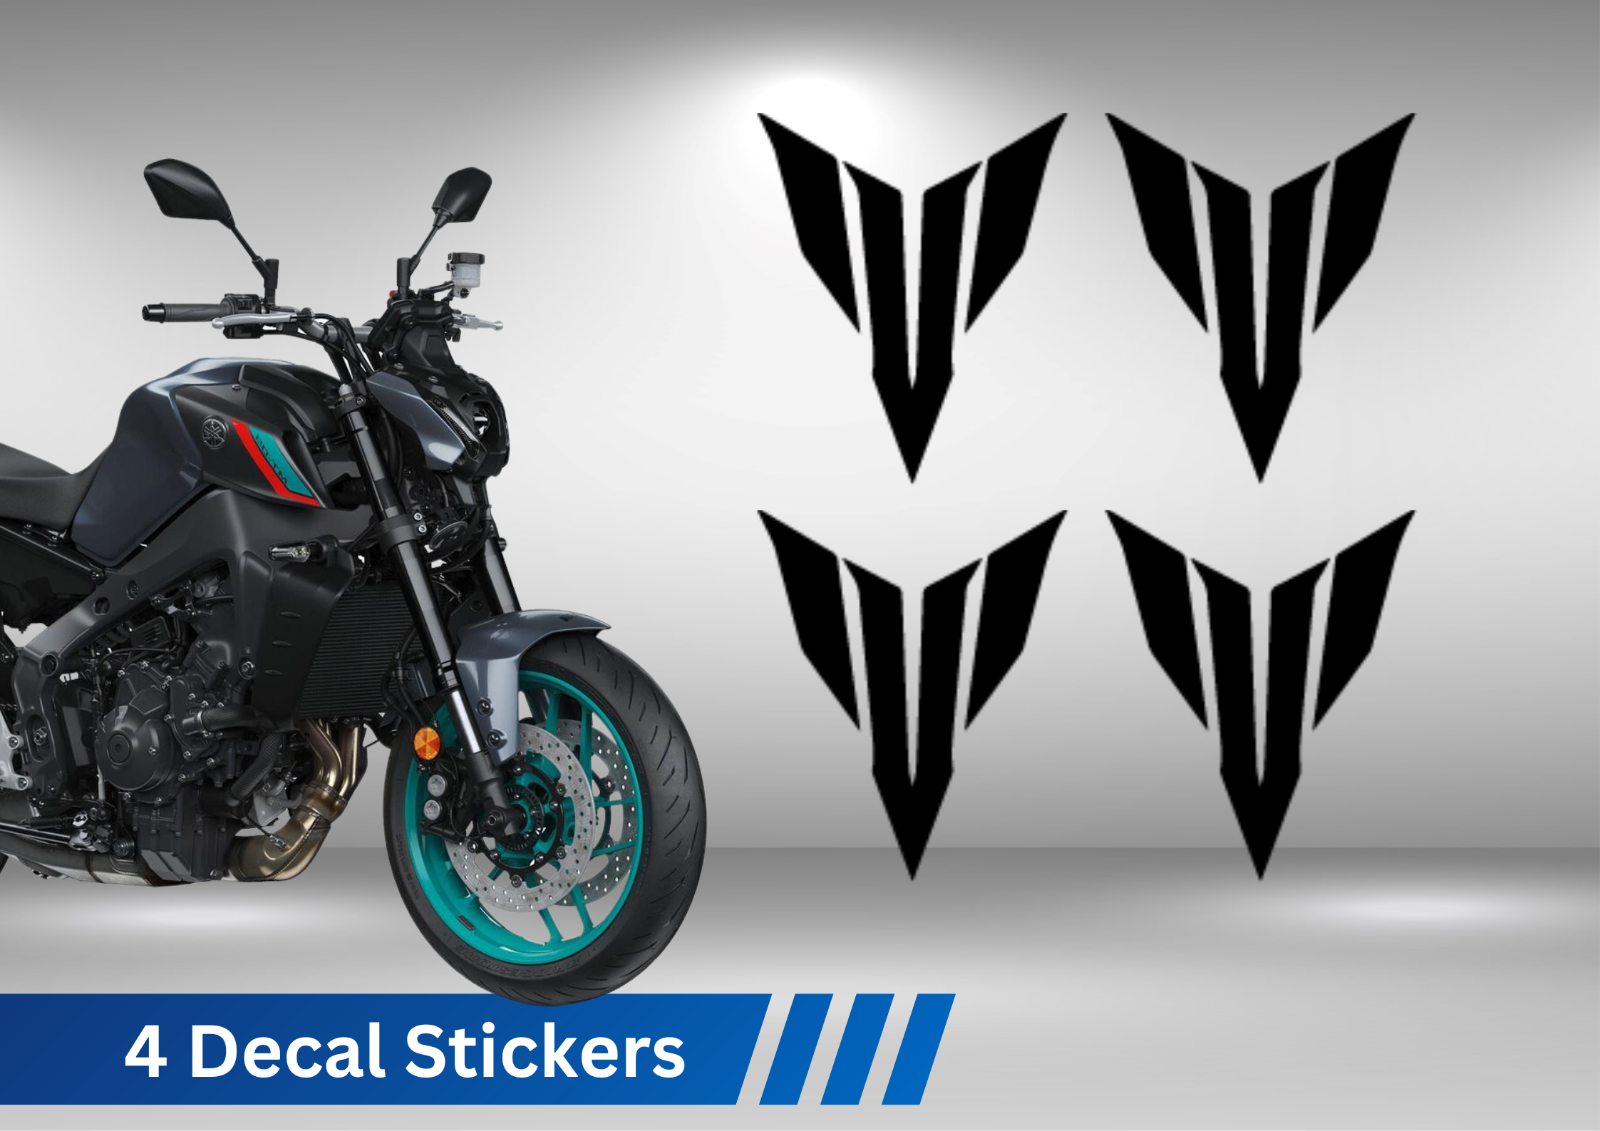 2 X Yamaha MT Logo Stickers for Motorcycles and Helmets - Etsy